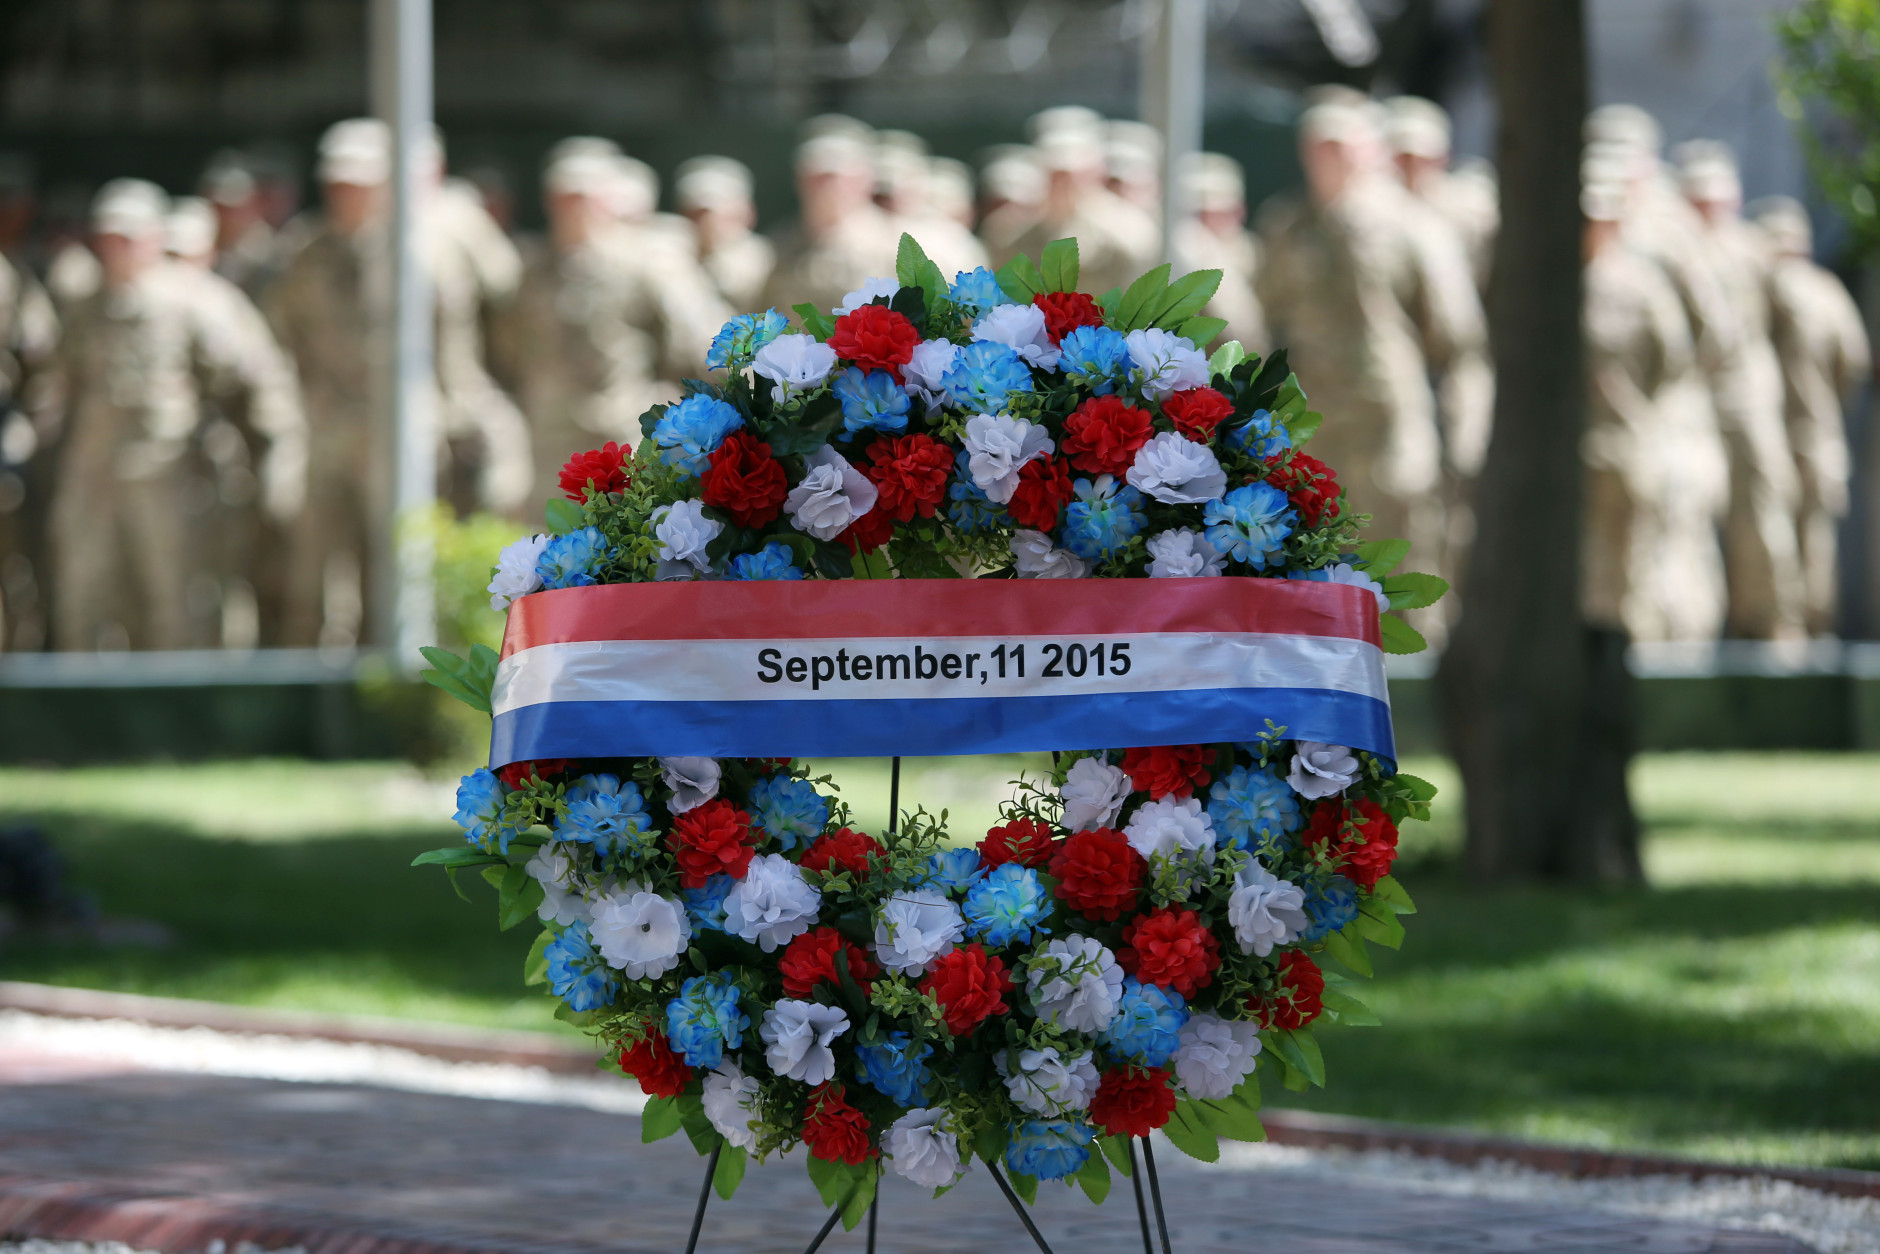 NATO forces stand behind a wreath during a memorial ceremony on the fourteenth anniversary of the 9-11 terrorist attacks on the United States at the headquarters of the International Security Assistance Force, in Kabul, Afghanistan, Friday, Sept. 11, 2015. (AP Photo/Rahmat Gul)